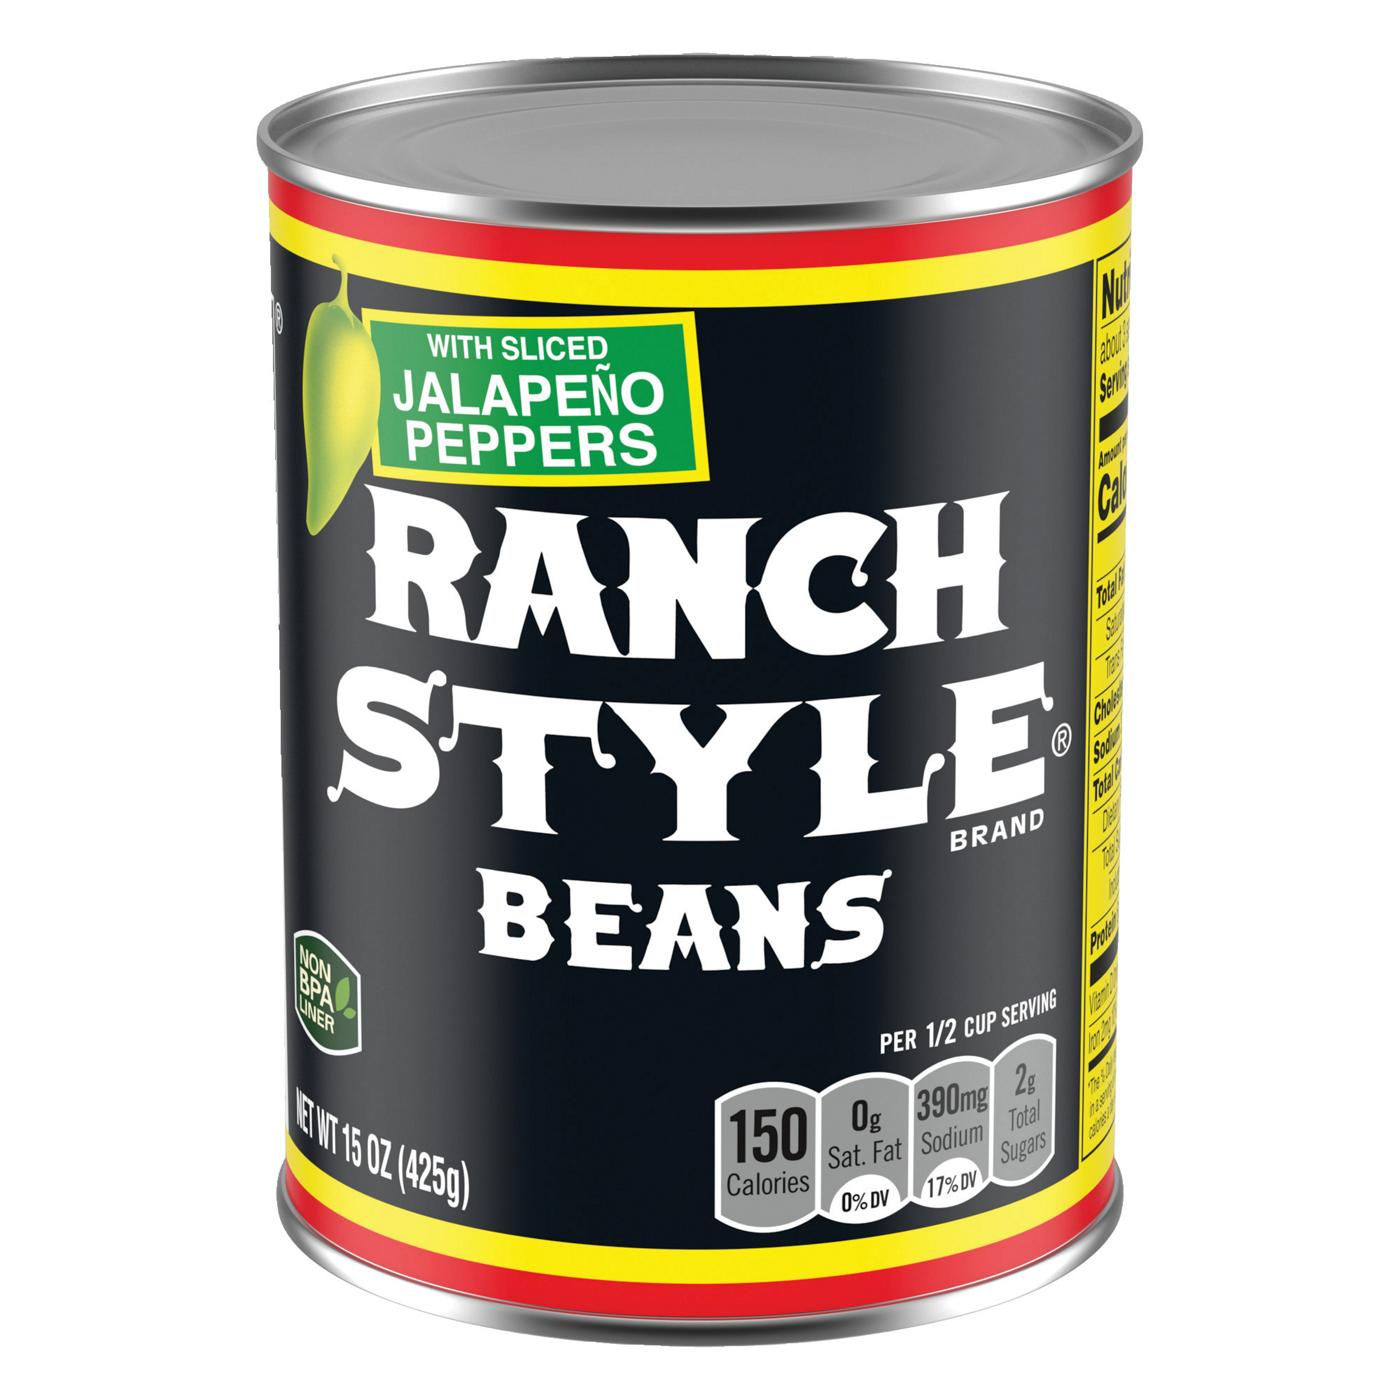 Ranch Style Beans Beans With Sliced Jalapeno Peppers Canned Beans; image 1 of 7